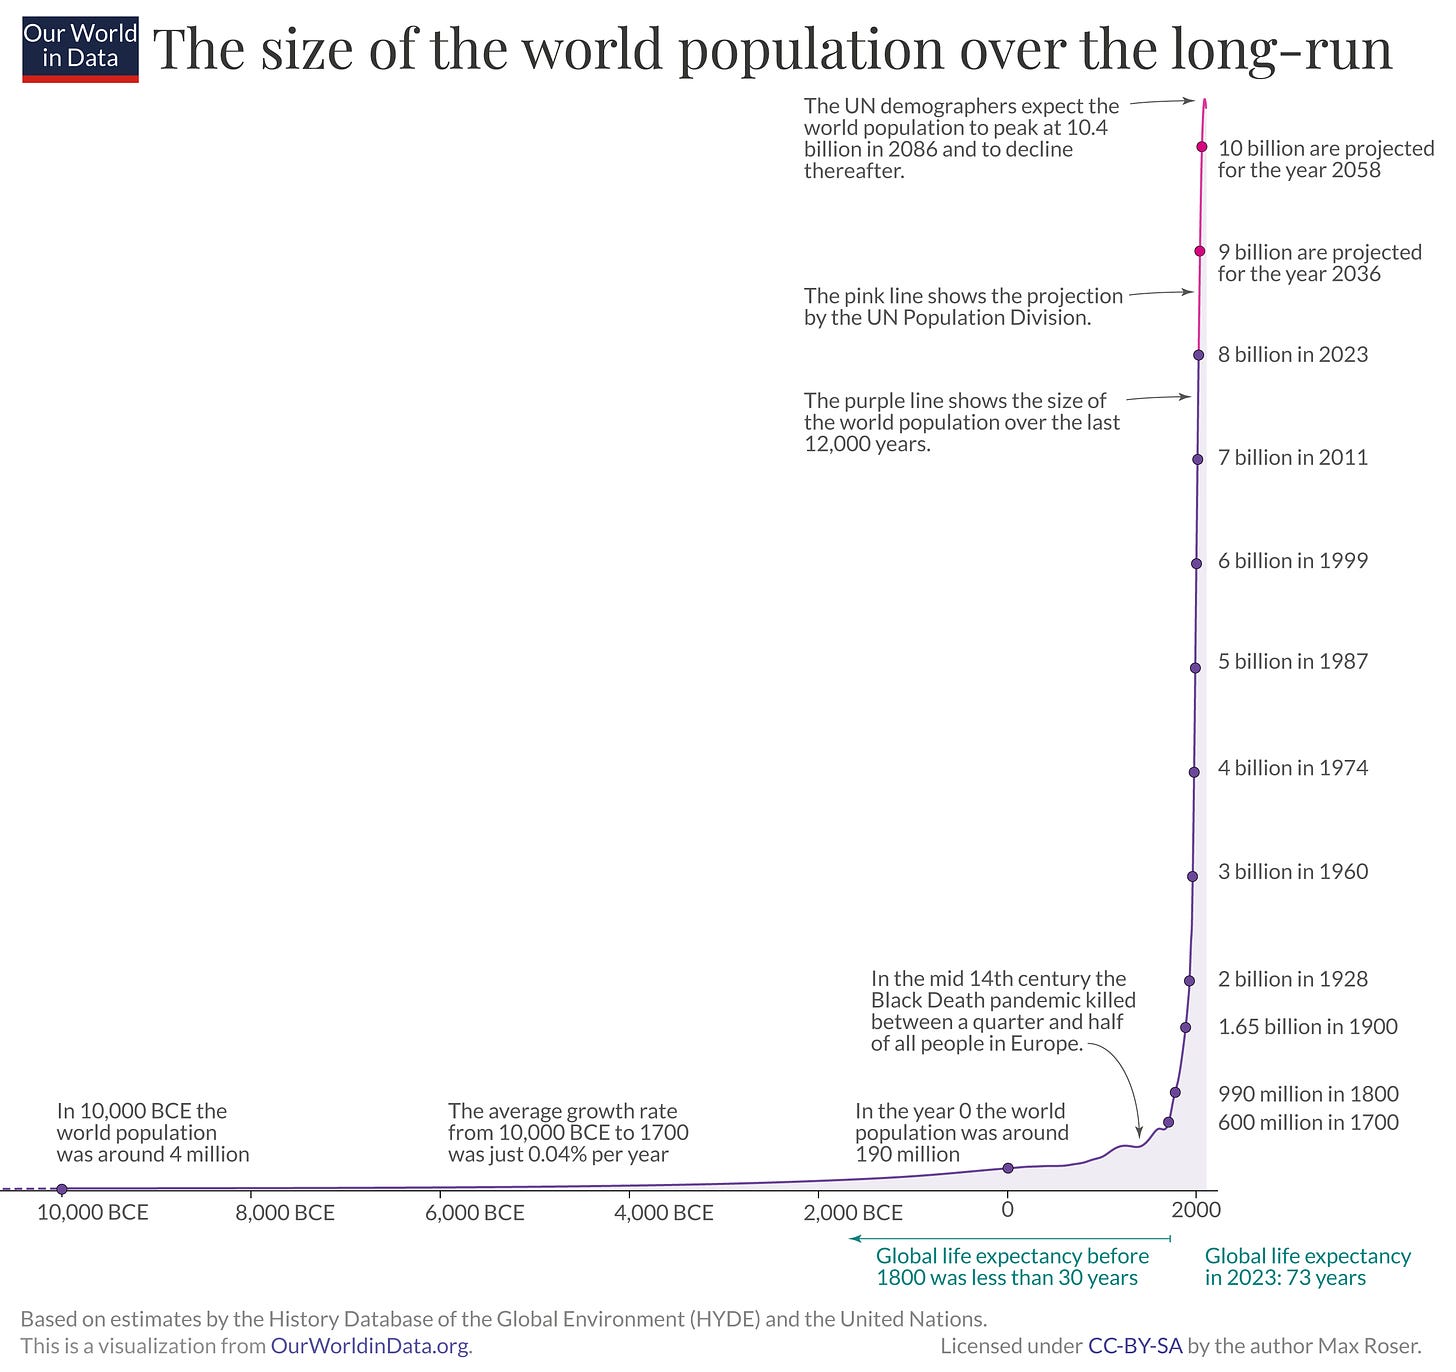 A line chart that shows the world population since 10,000BC. The line is mostly flat until the last few centuries when the population increased rapidly.